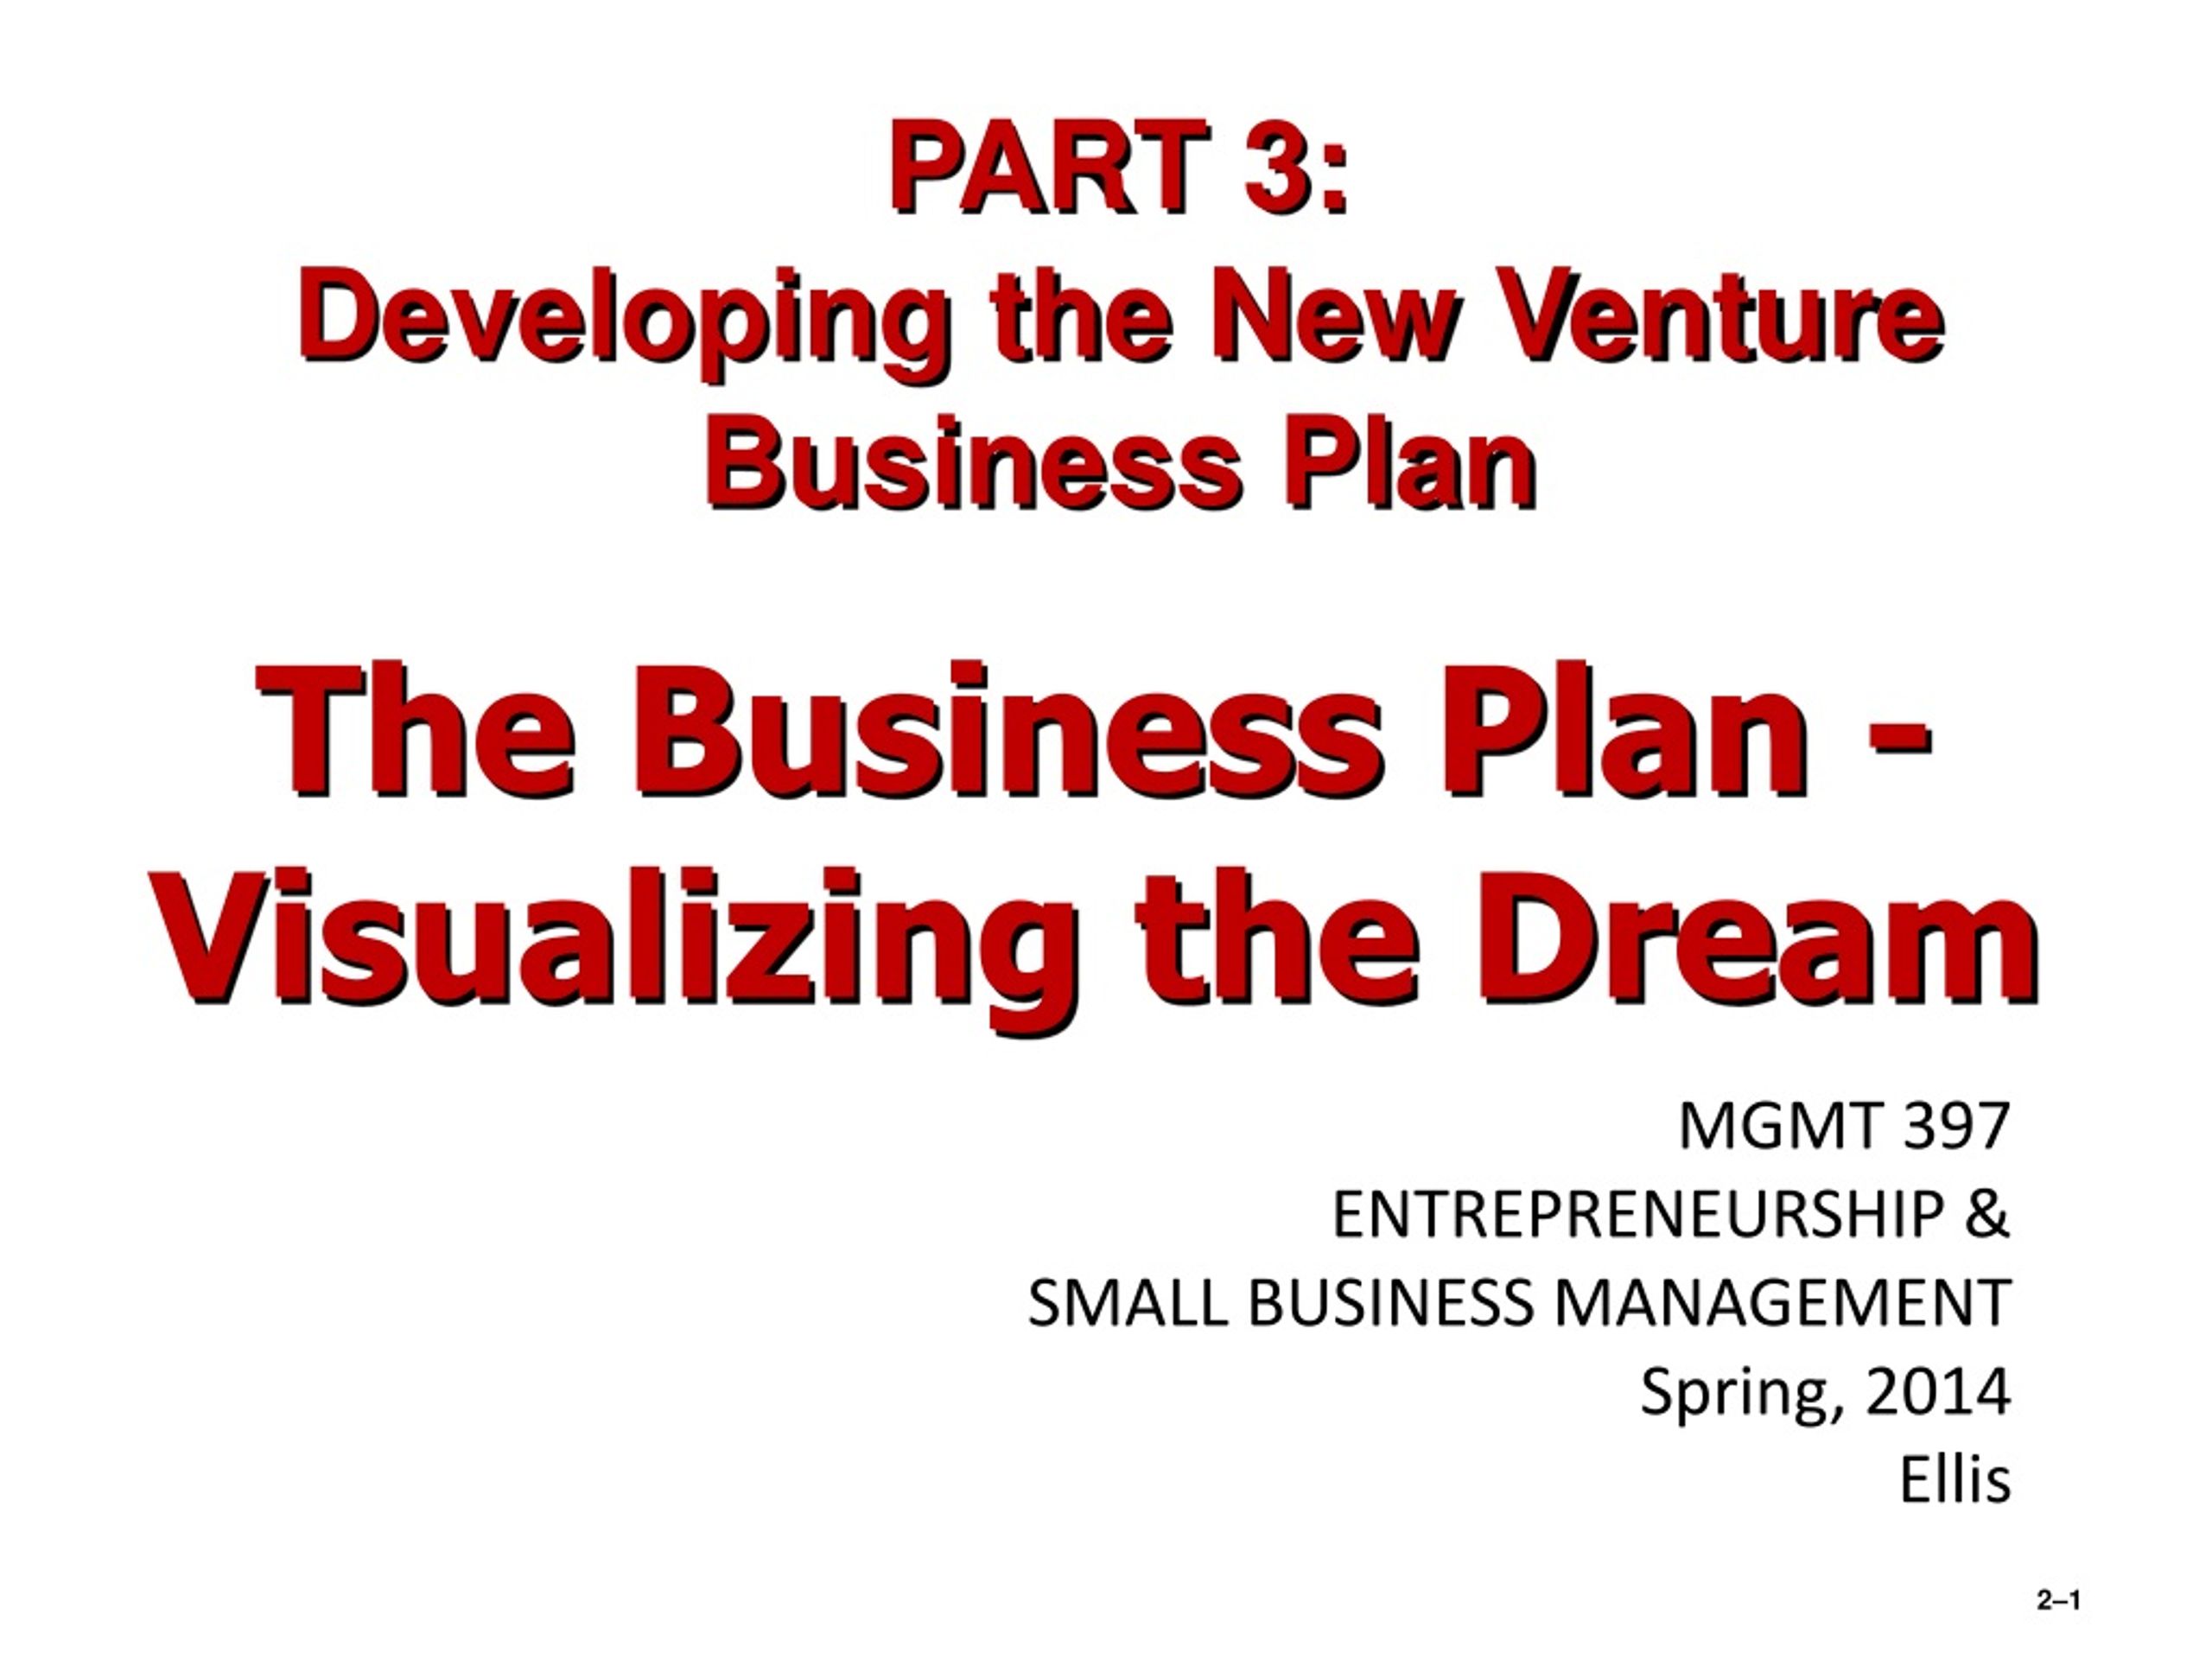 the business plan visualizing the dream